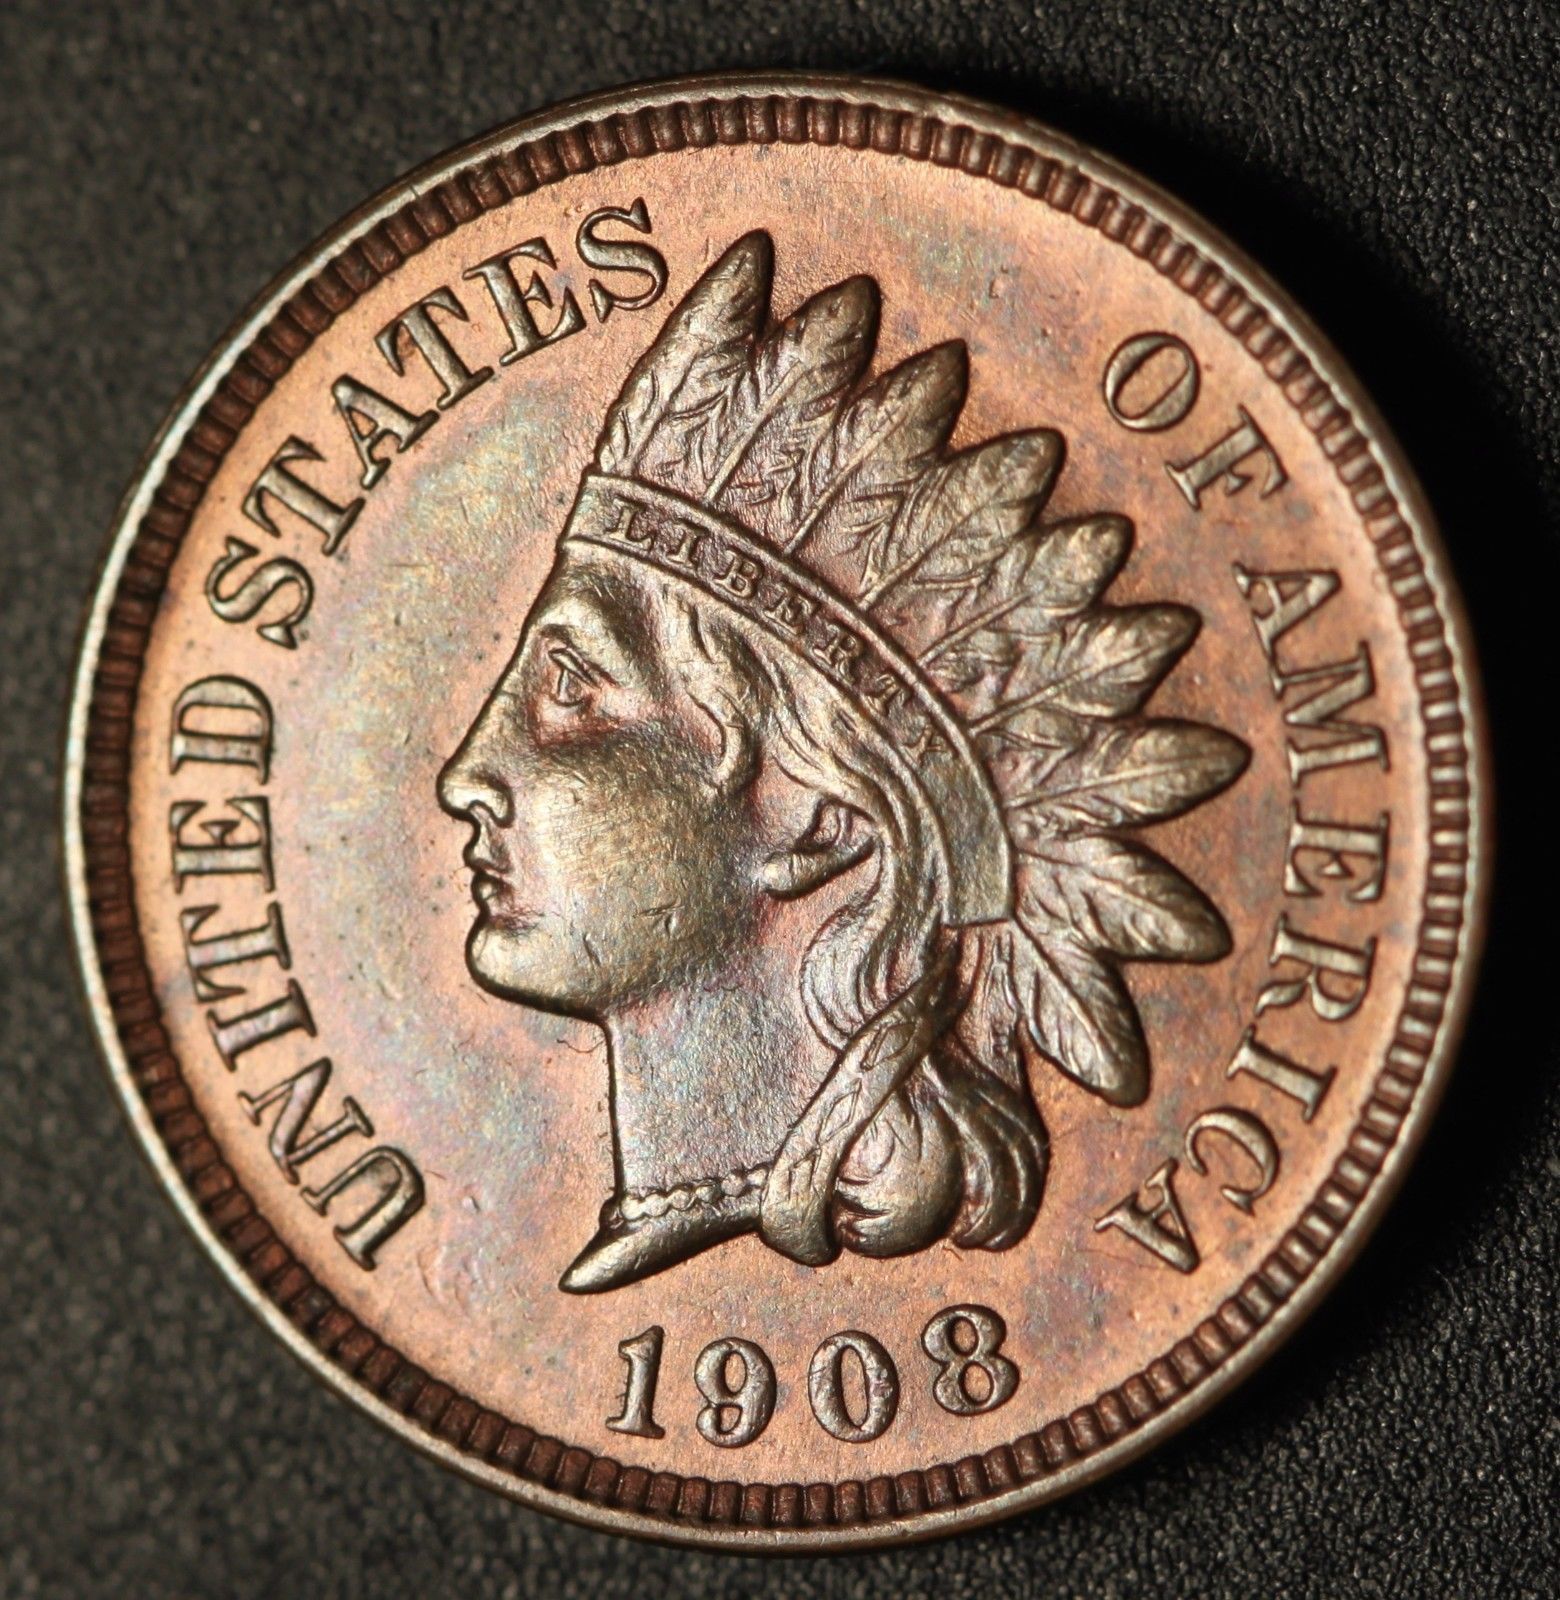 1908 RPD-015 - Indian Head Penny - Photo by Ed Nathanson